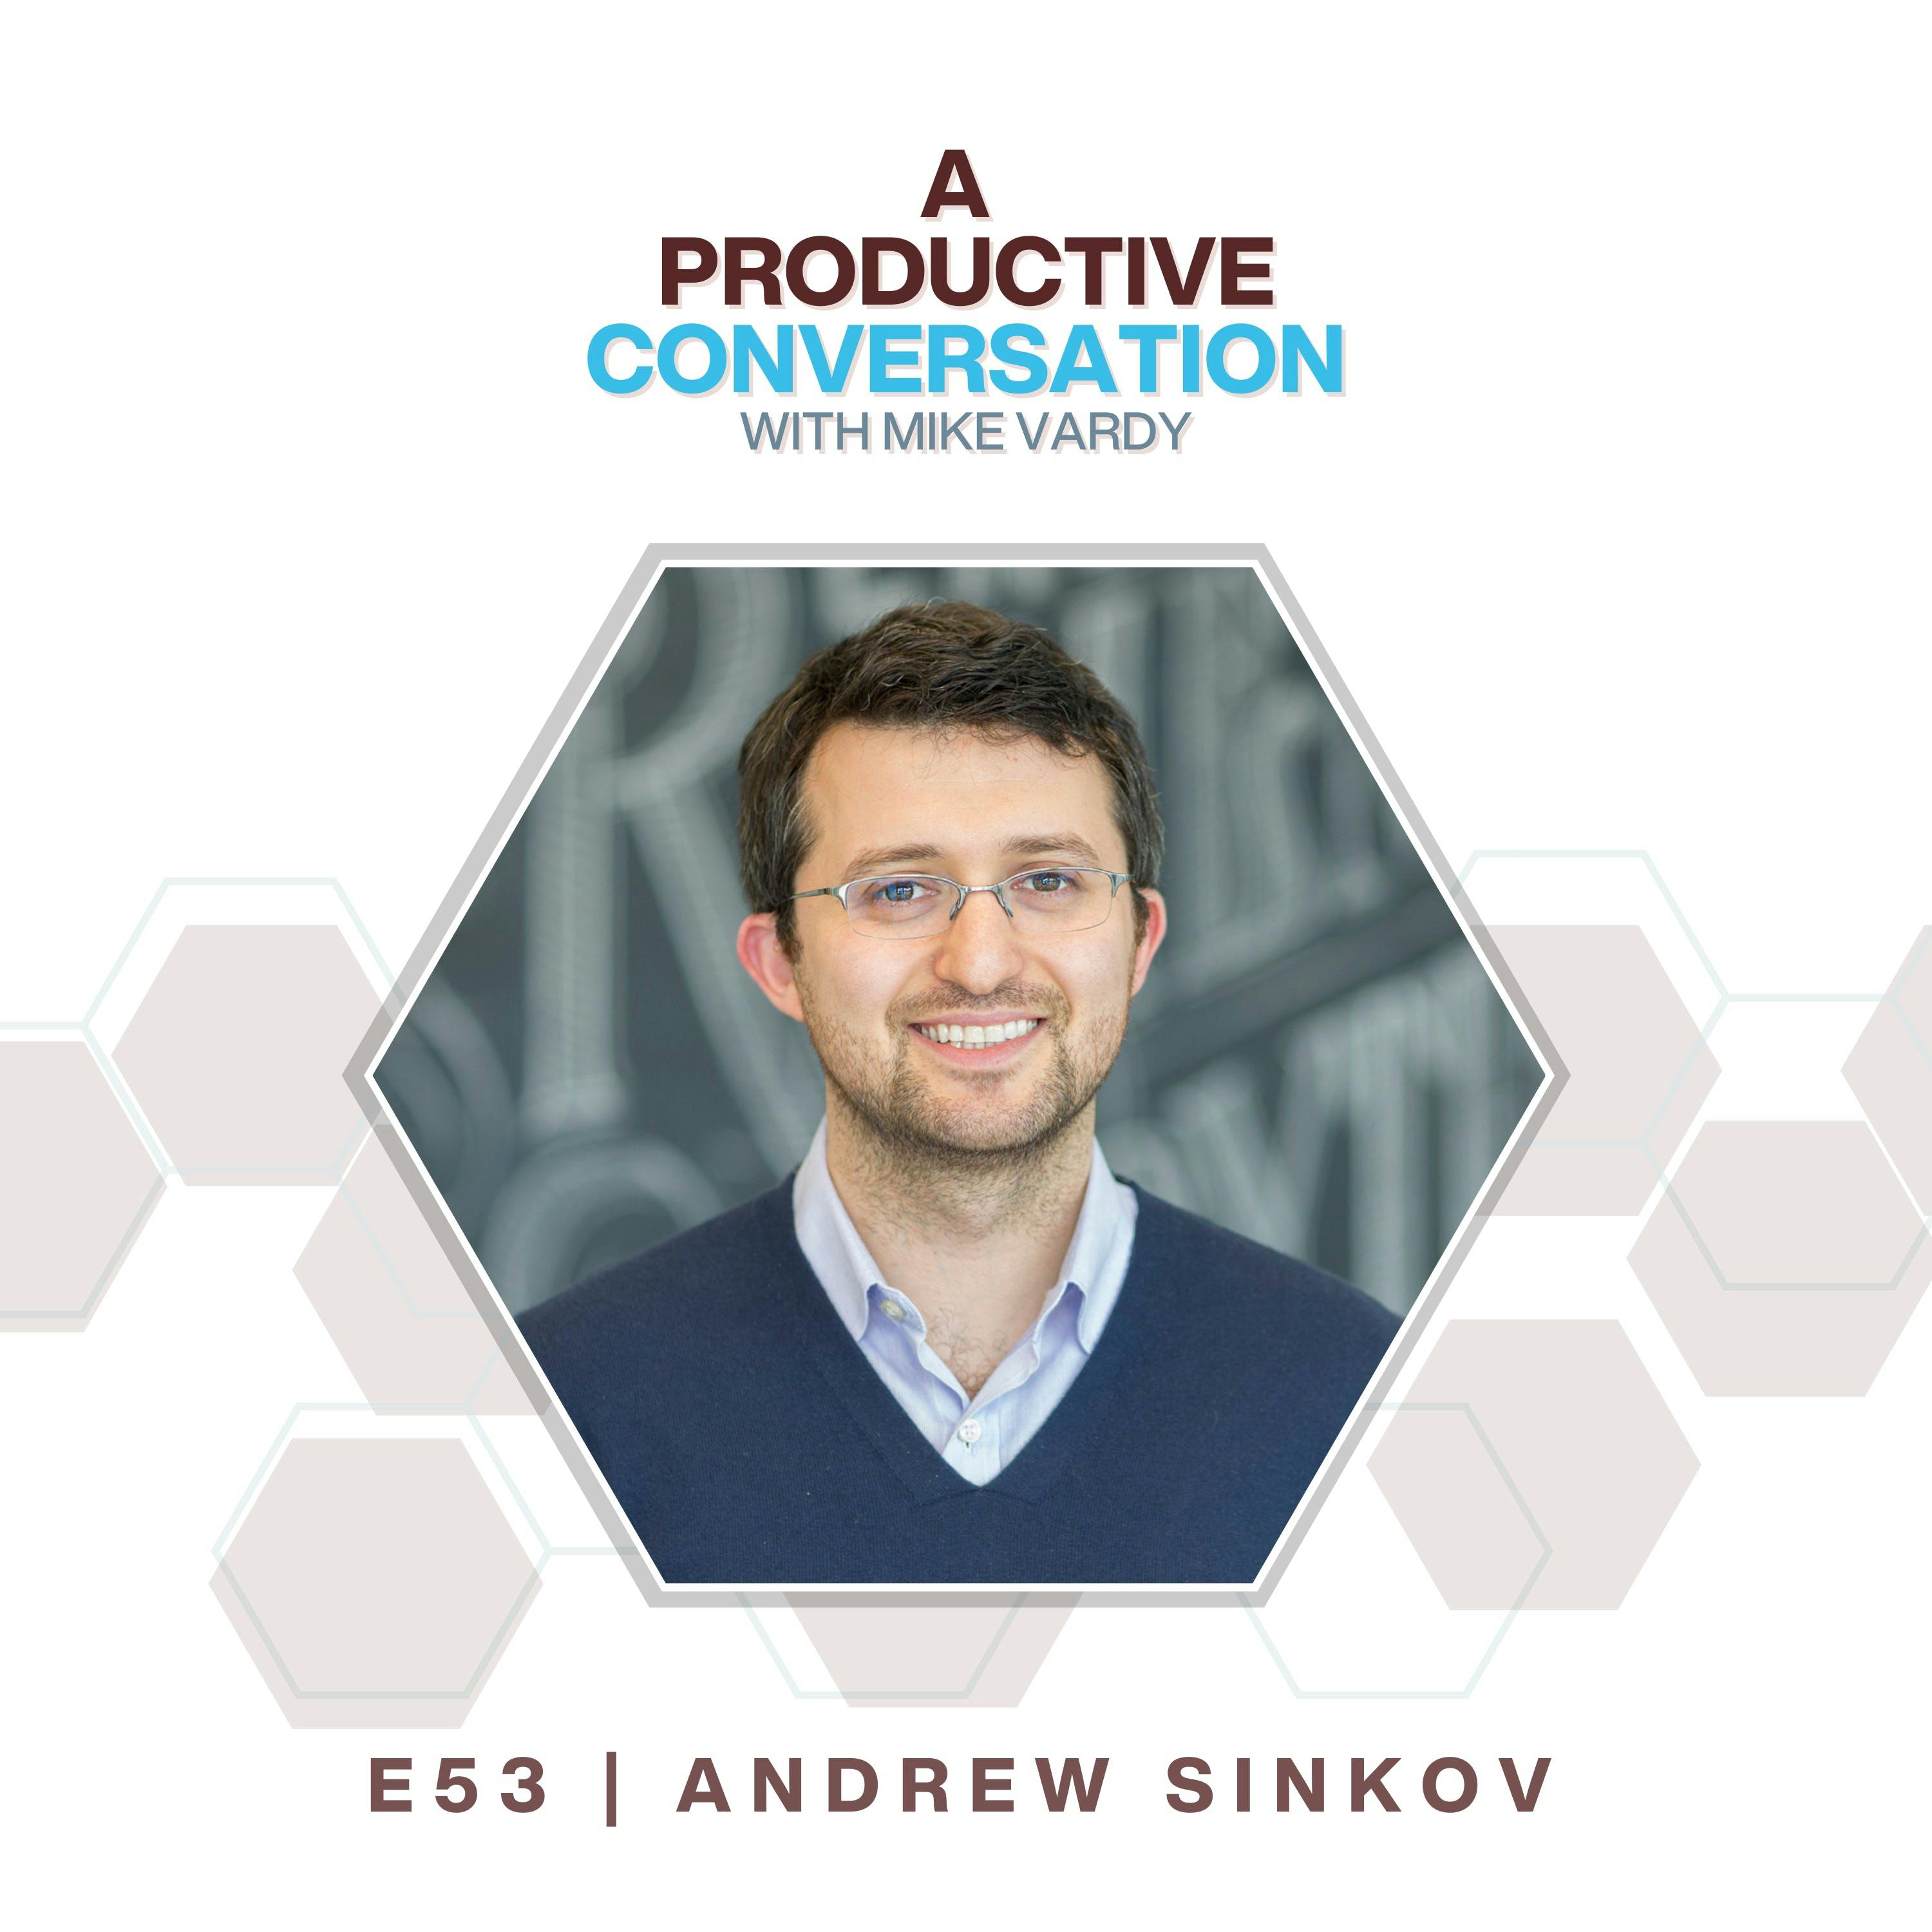 Everything Evernote with Andrew Sinkov